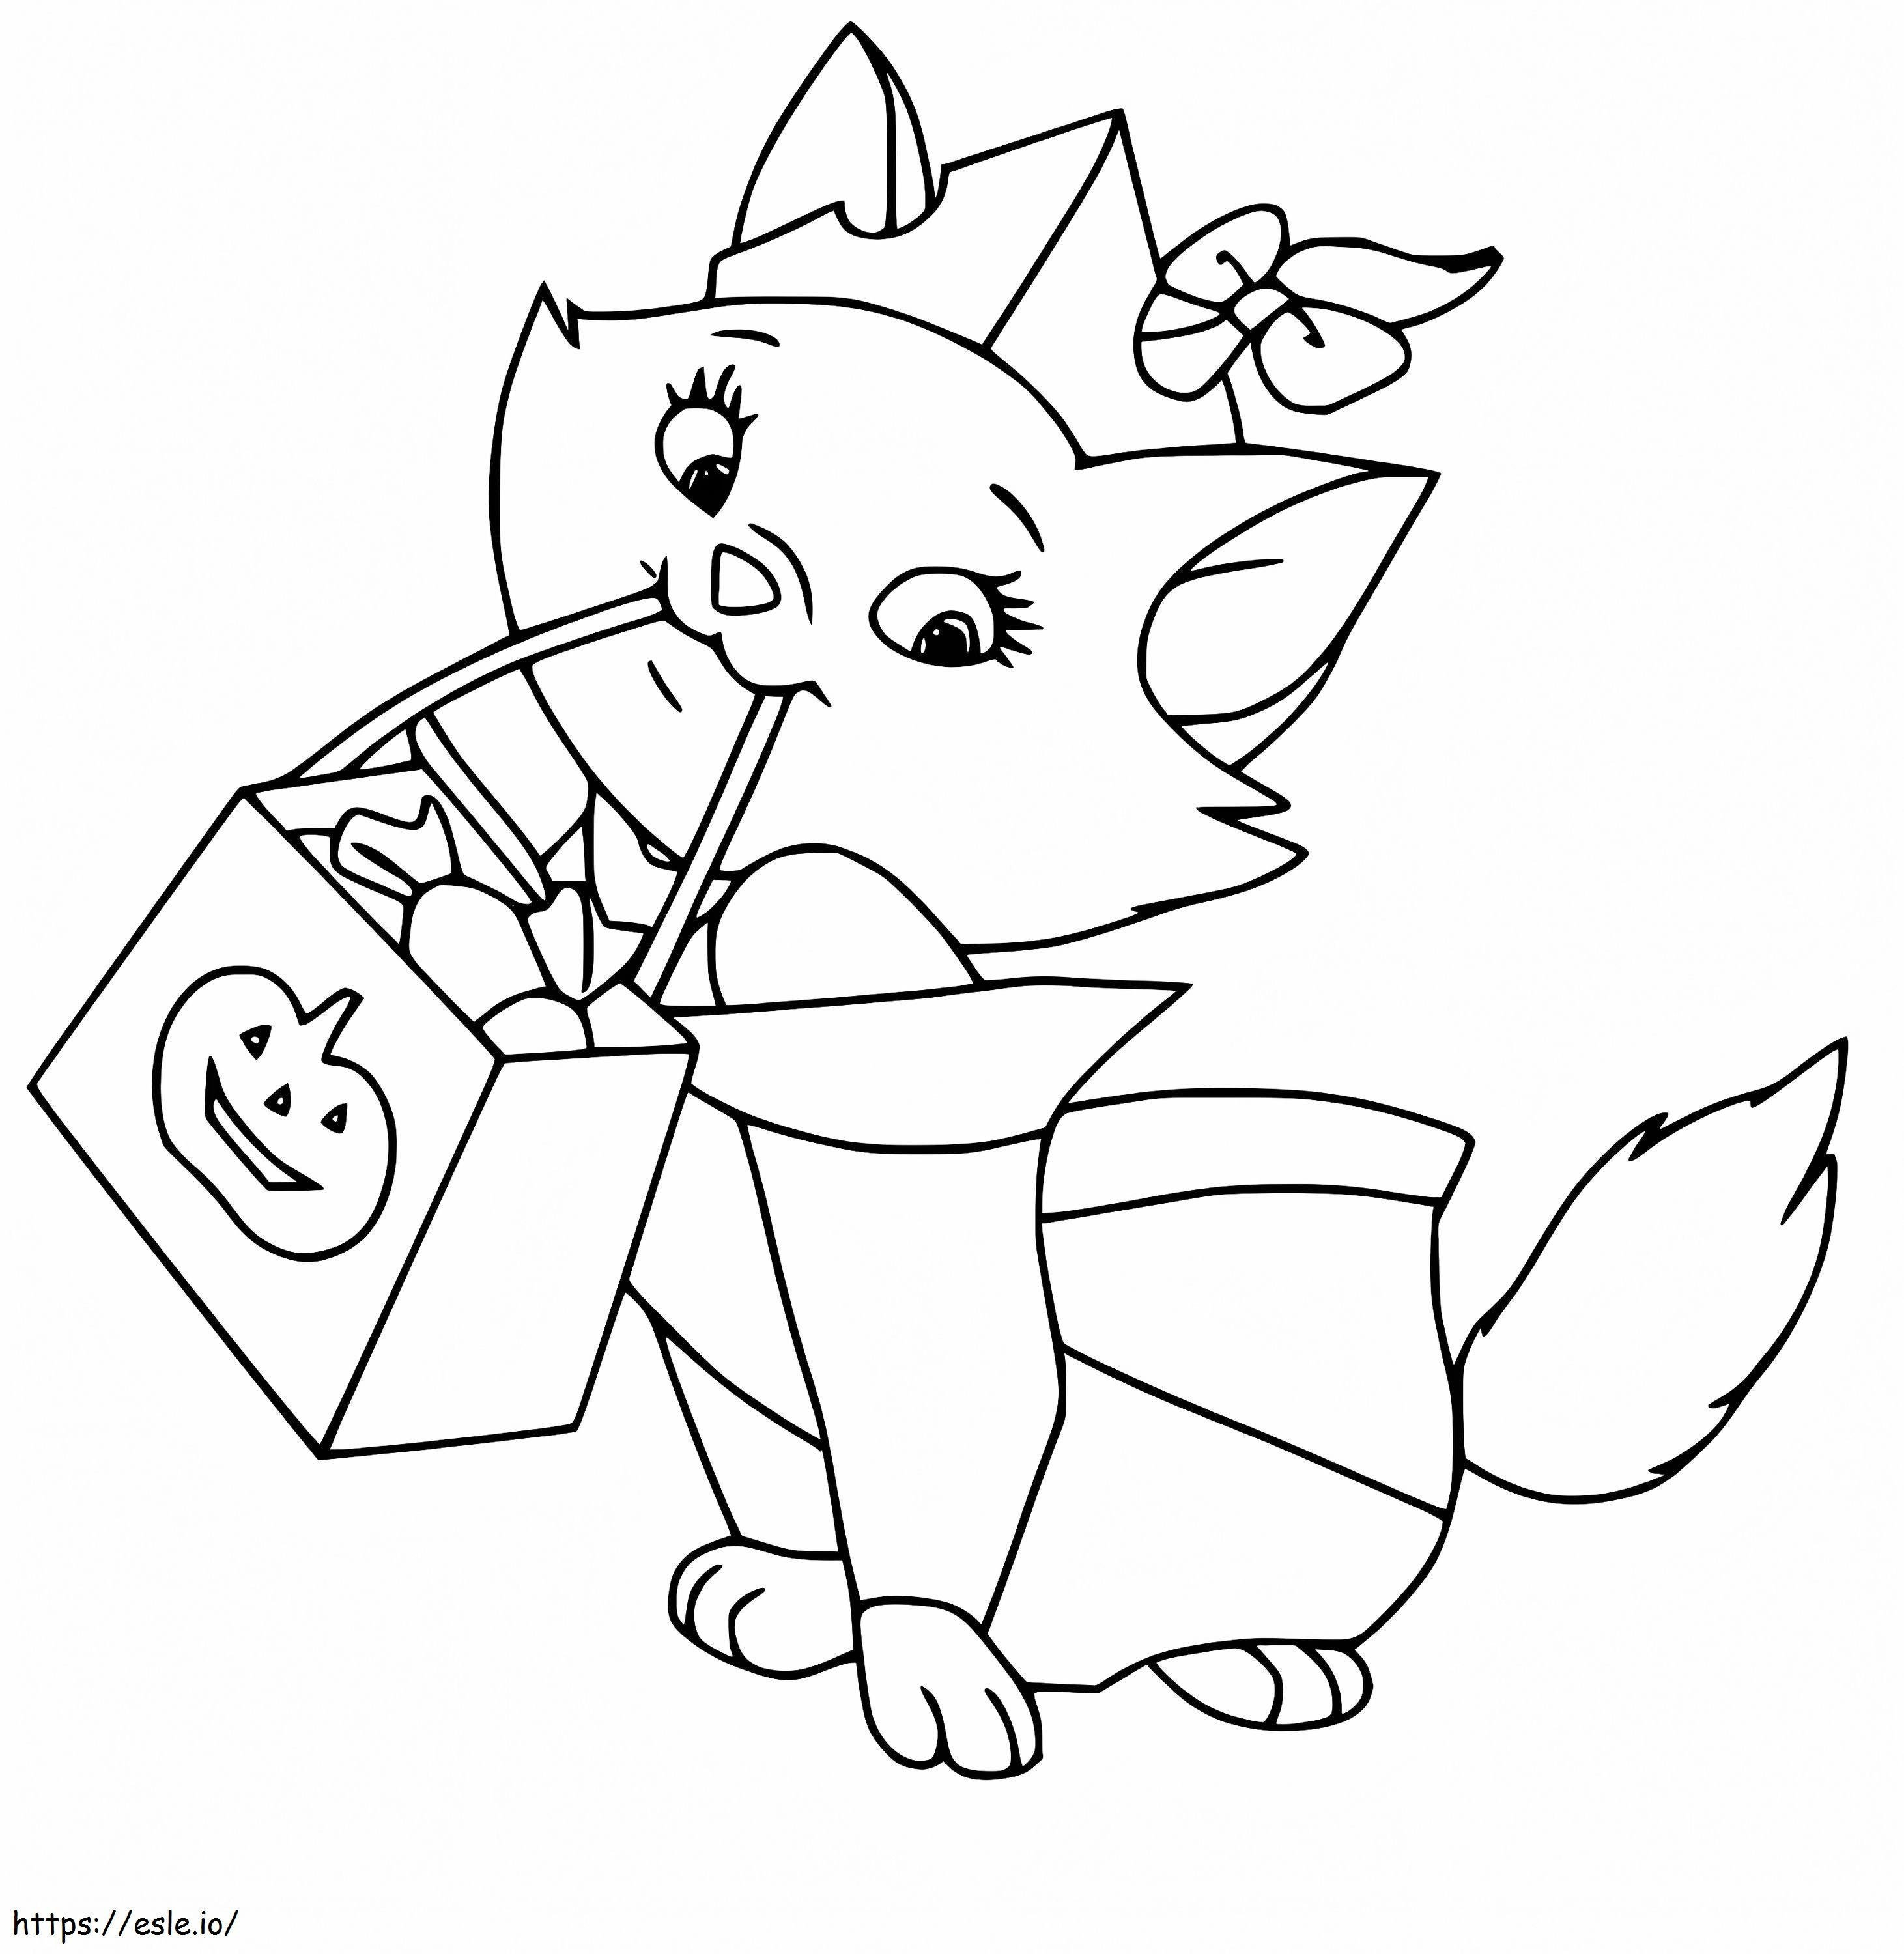 Halween Cat 2 coloring page